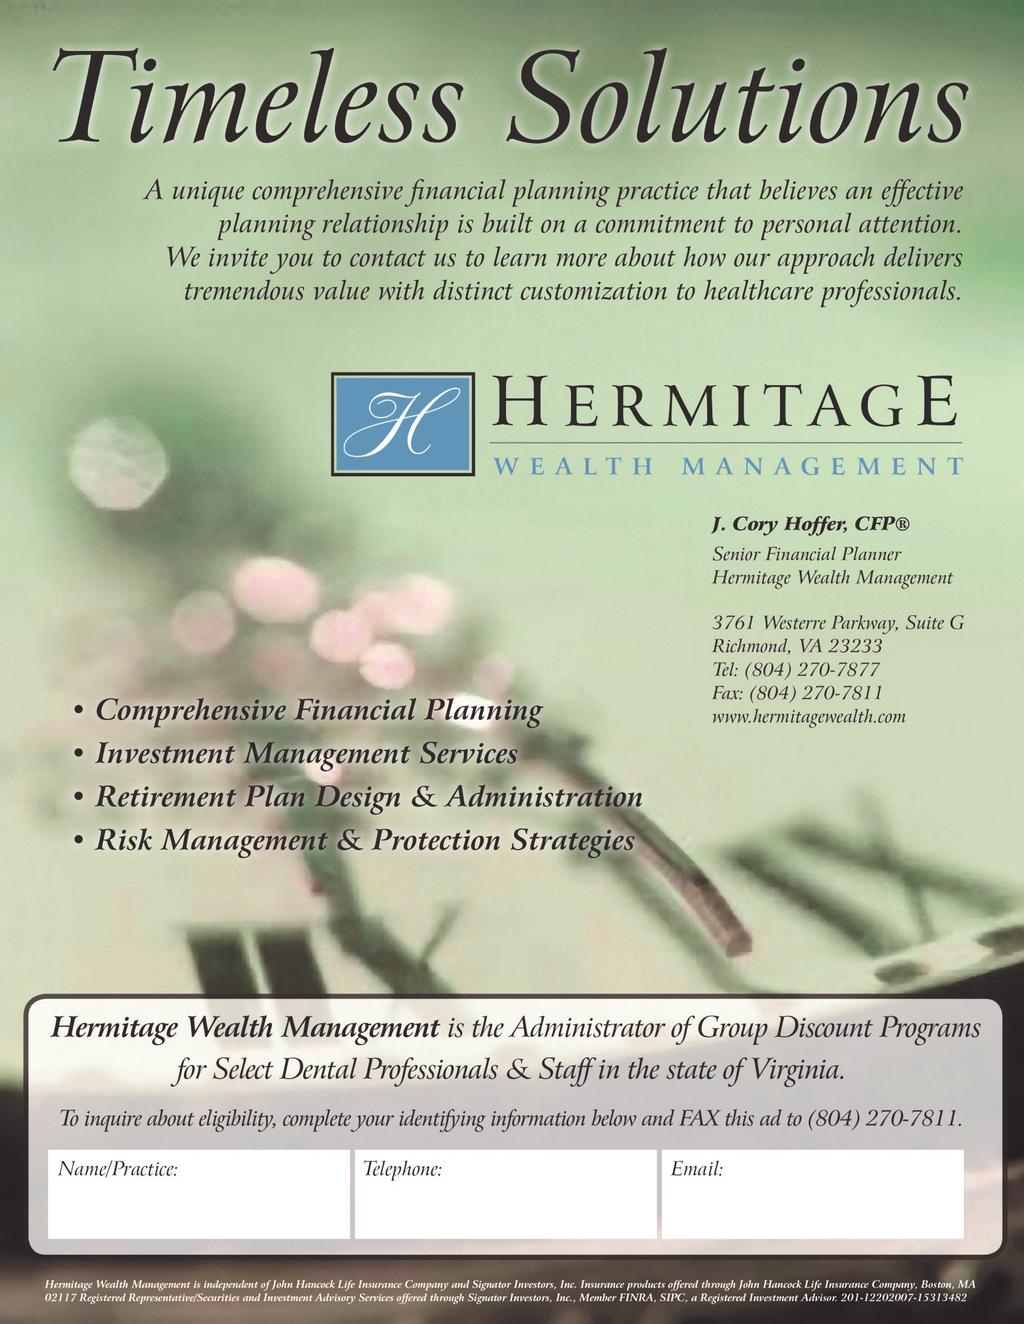 VAGD Would Like to Thank Our Corporate Sponsors: Hermitage